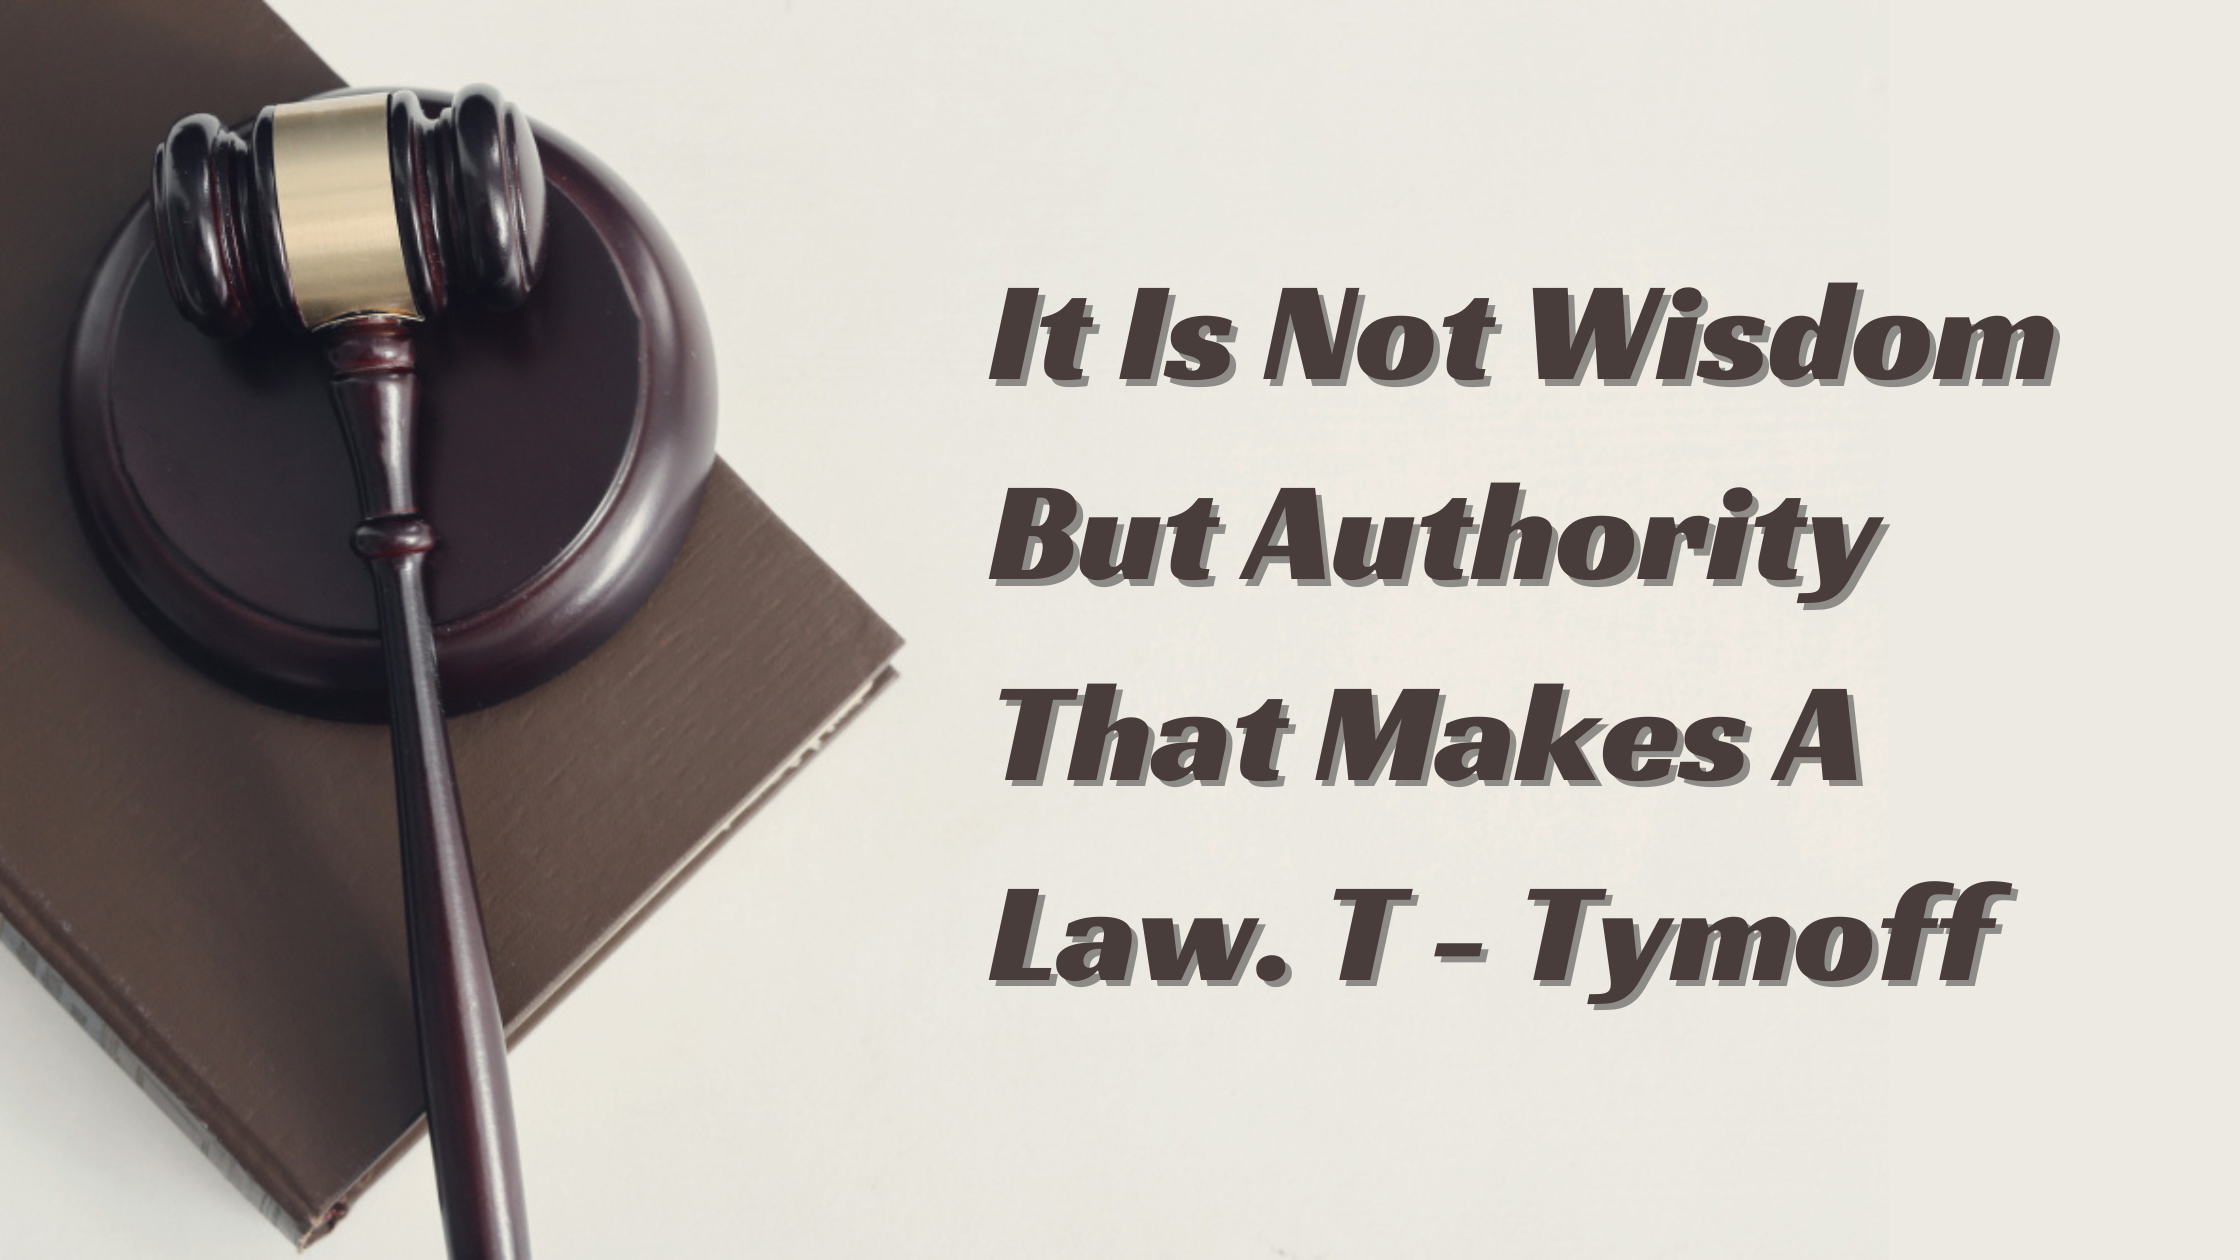 It Is Not Wisdom But Authority That Makes A Law. T – Tymoff